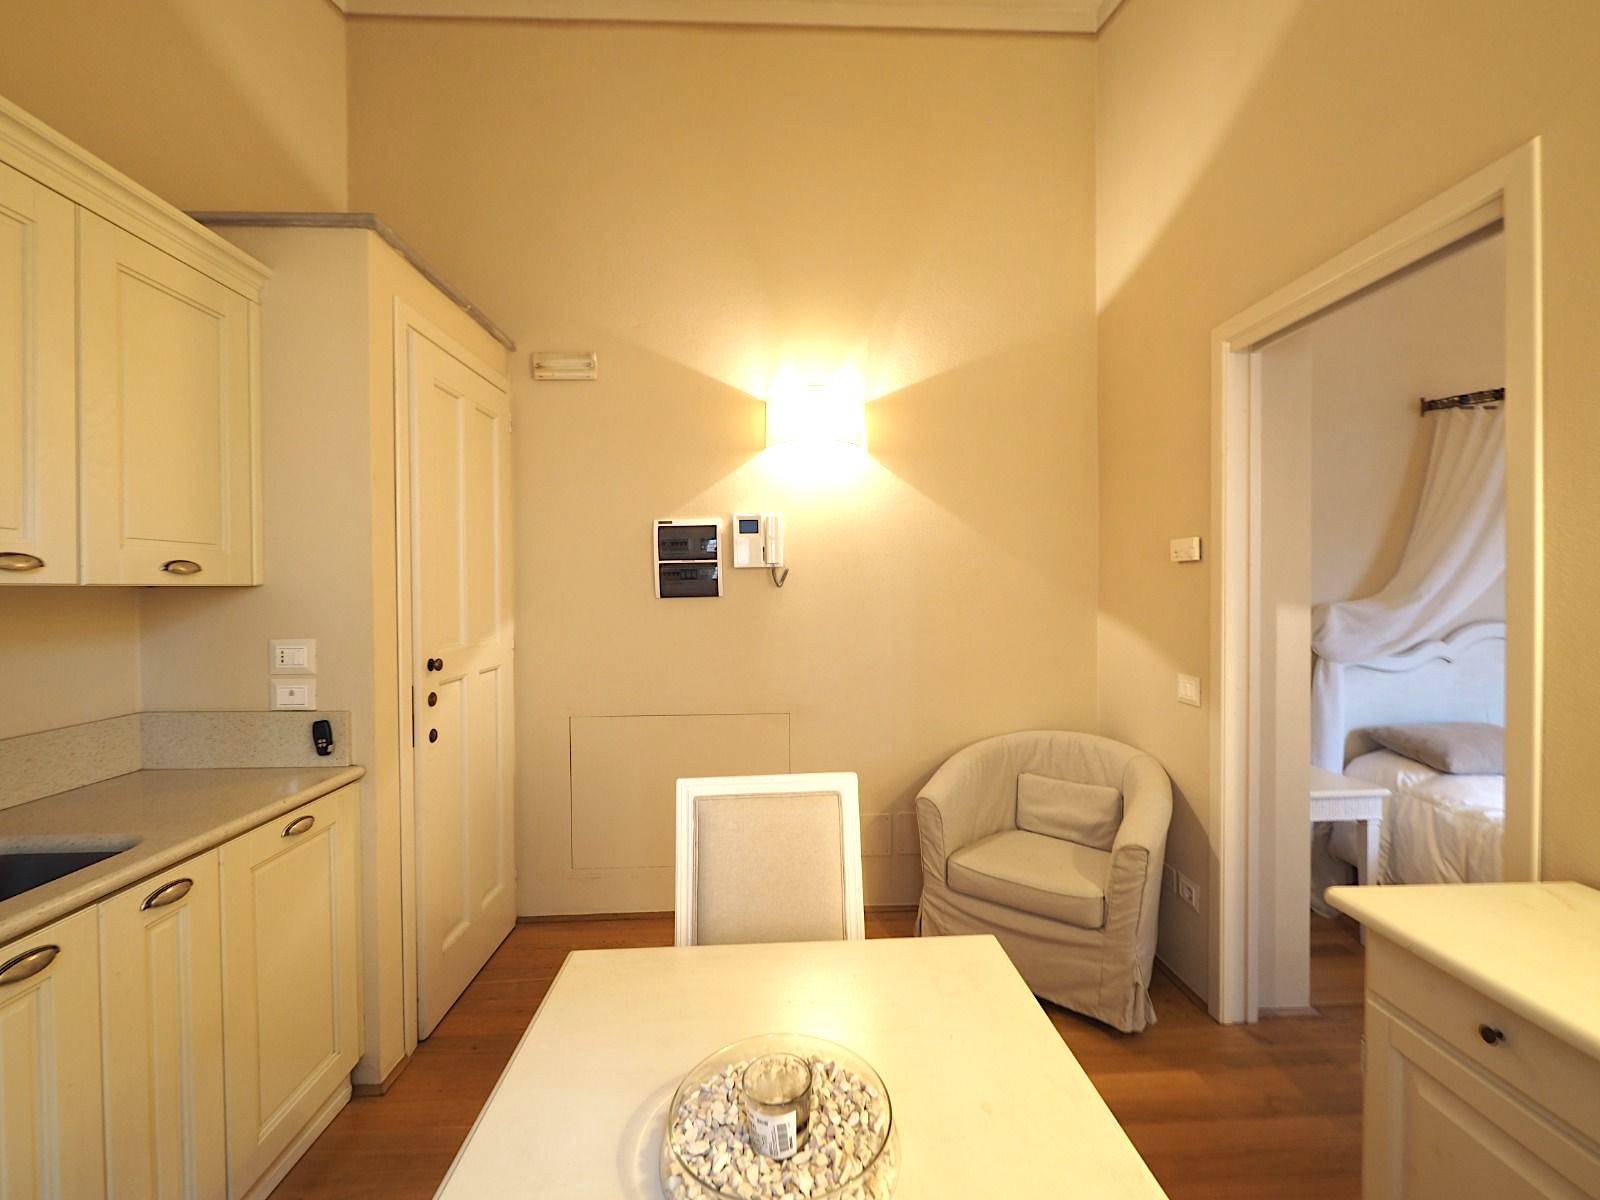 APARTMENT FLORENCE - LE CURE AREA For rent lovely apartment, inside new and elegant building complex, in a quiet and elegant area, conveniently 